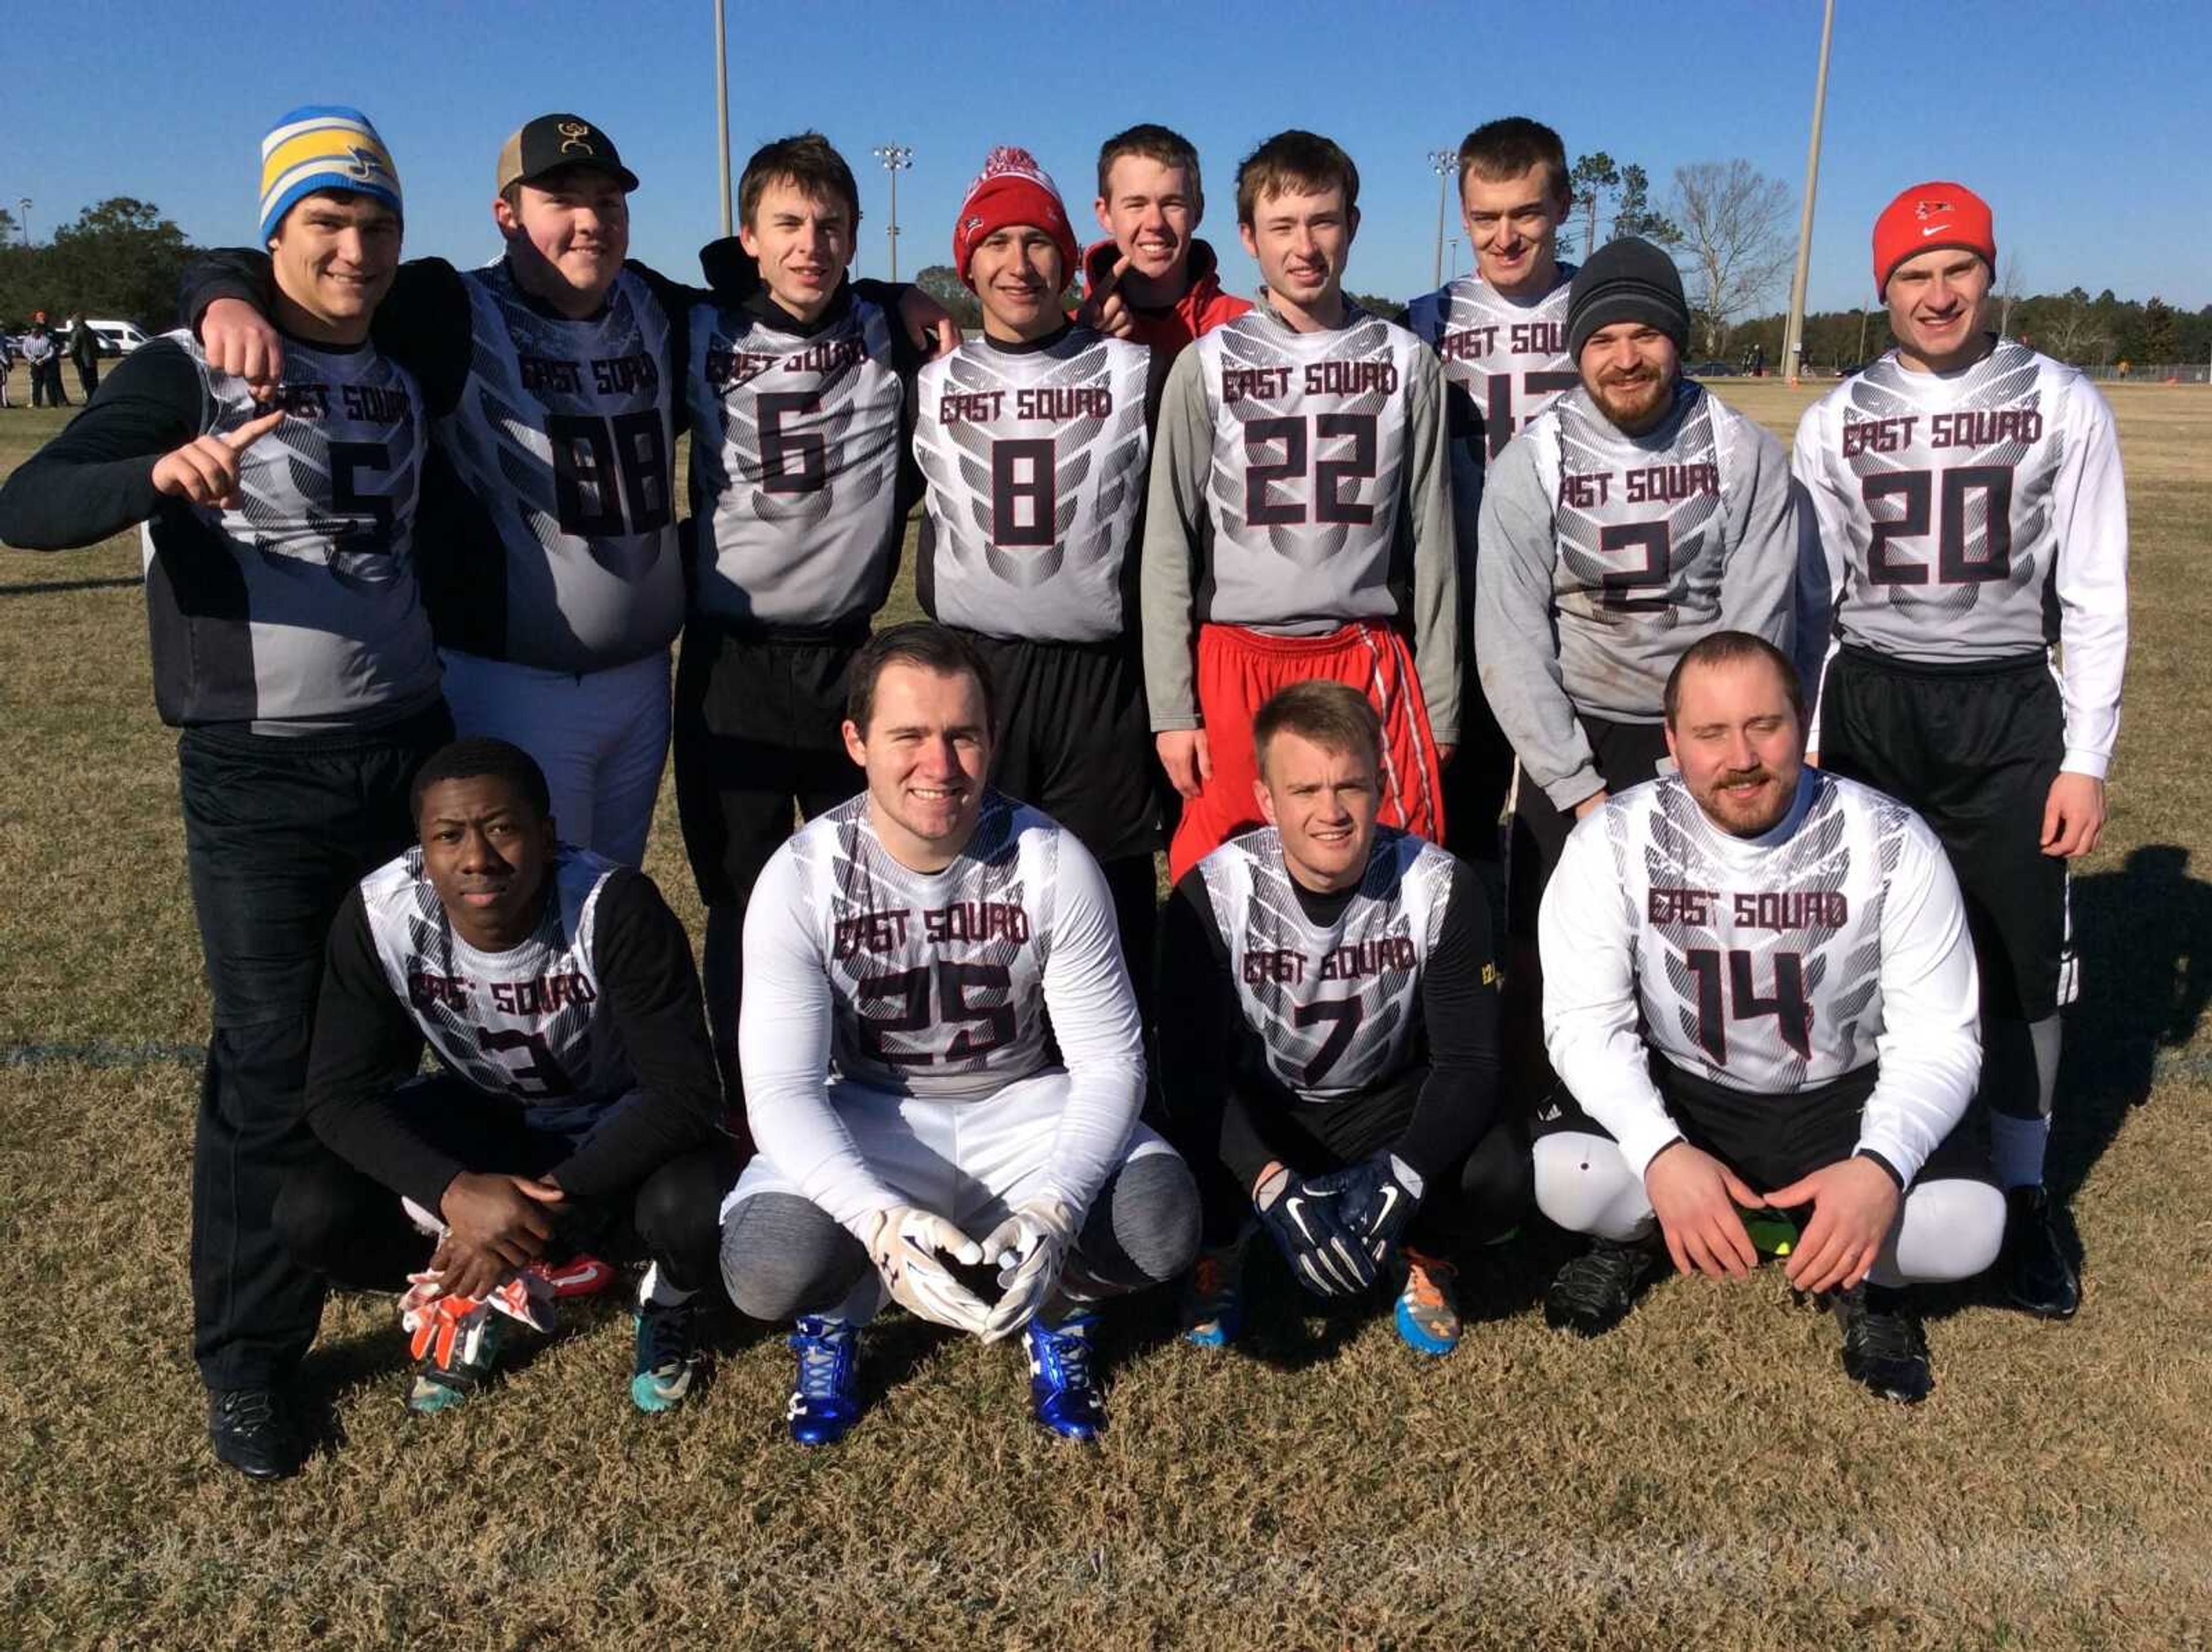 East Squad, comprised of a group of men that lived together on a Towers East floor completed in that national flag football tournament during winter break.